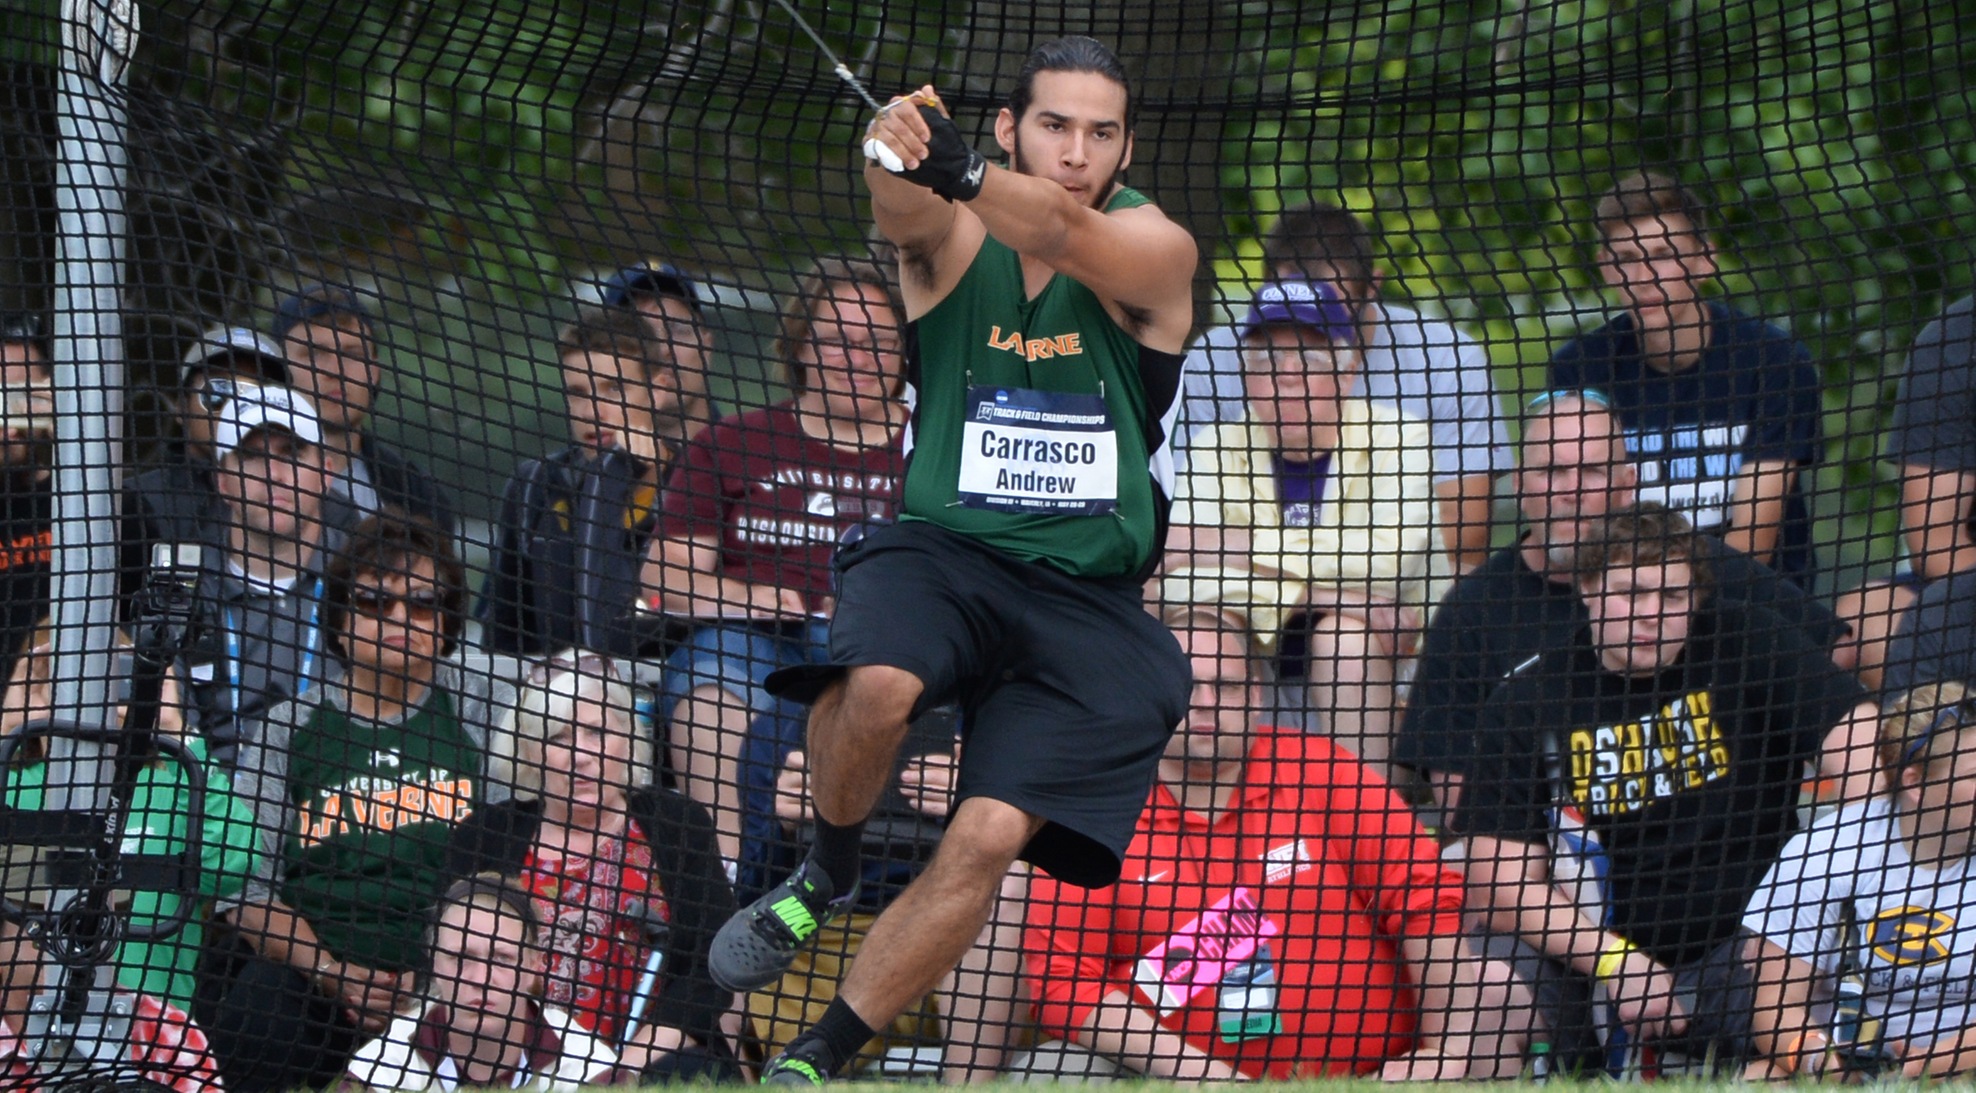 Carrasco wins Hammer at Rossi Relays